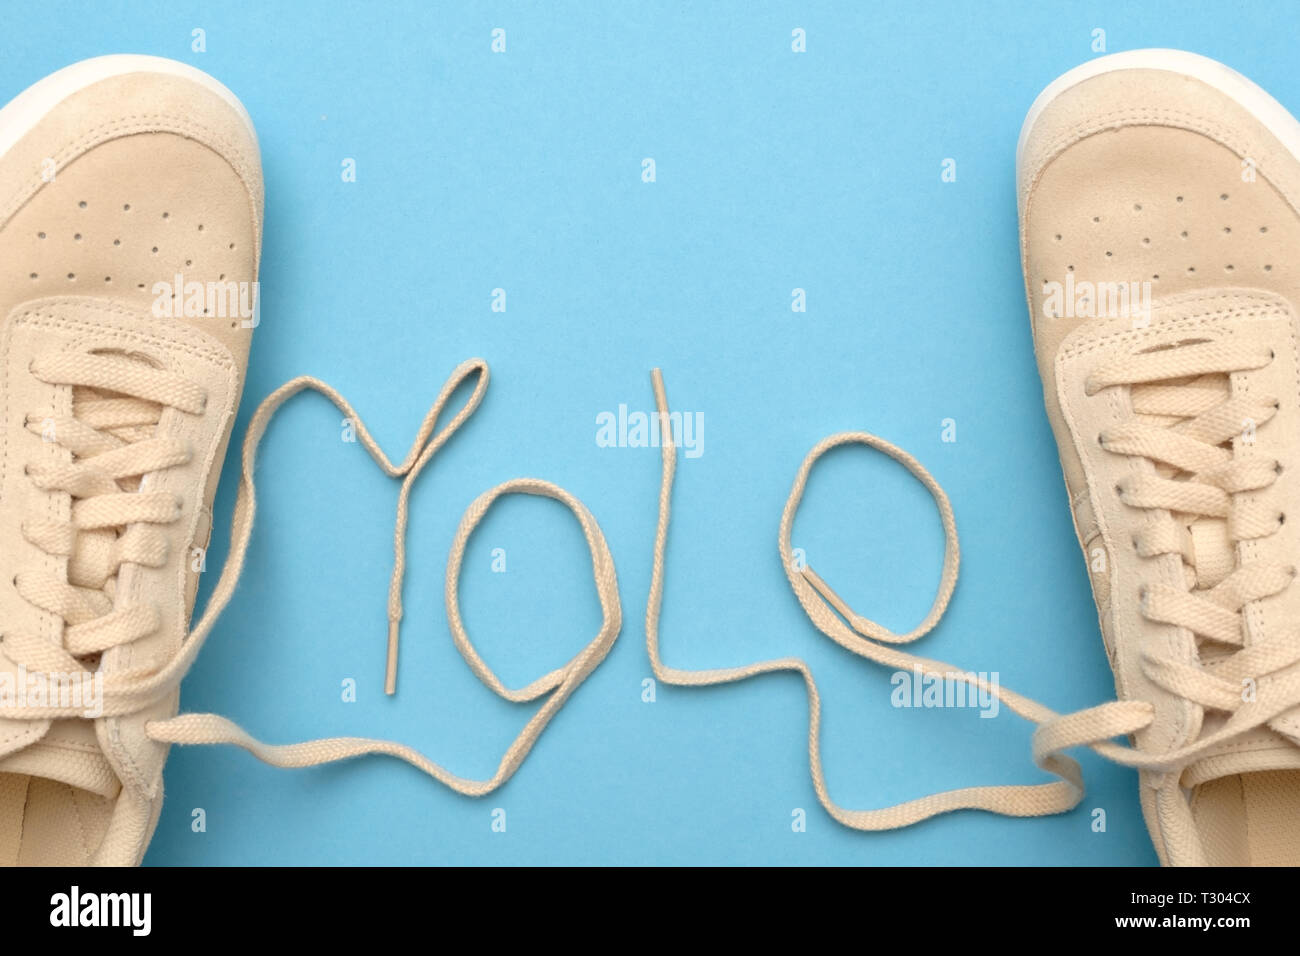 New women sneakers with laces in yolo abbreviation text. Flat lay on blue background. You only live once concept Stock Photo